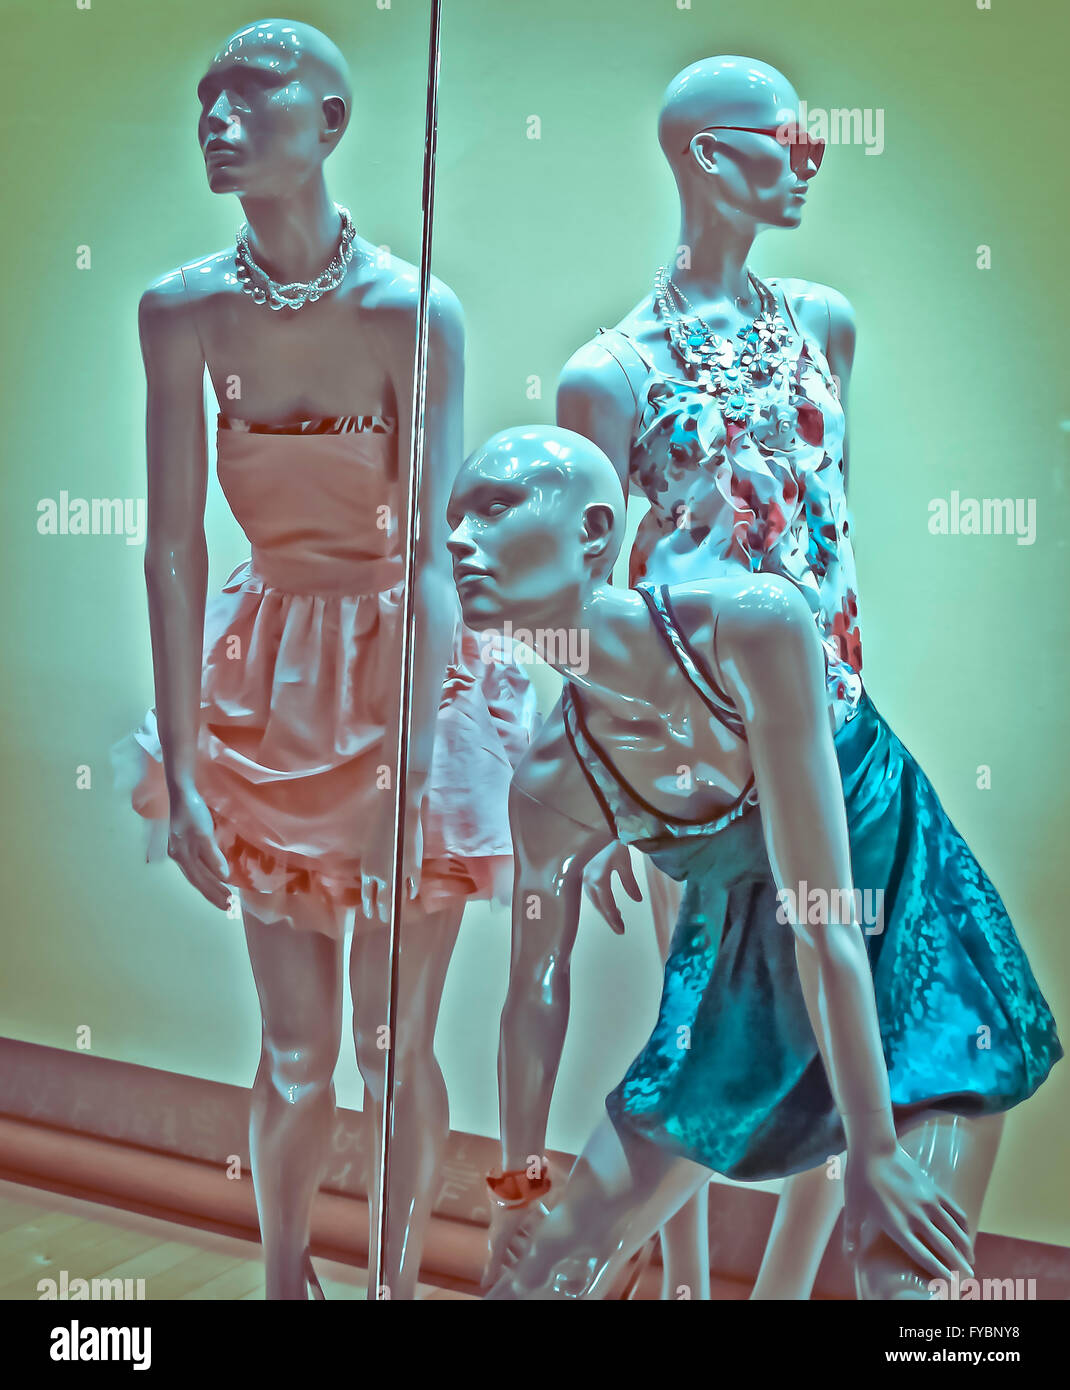 Mannequins  starring out from the window display with summer dress on. Stock Photo